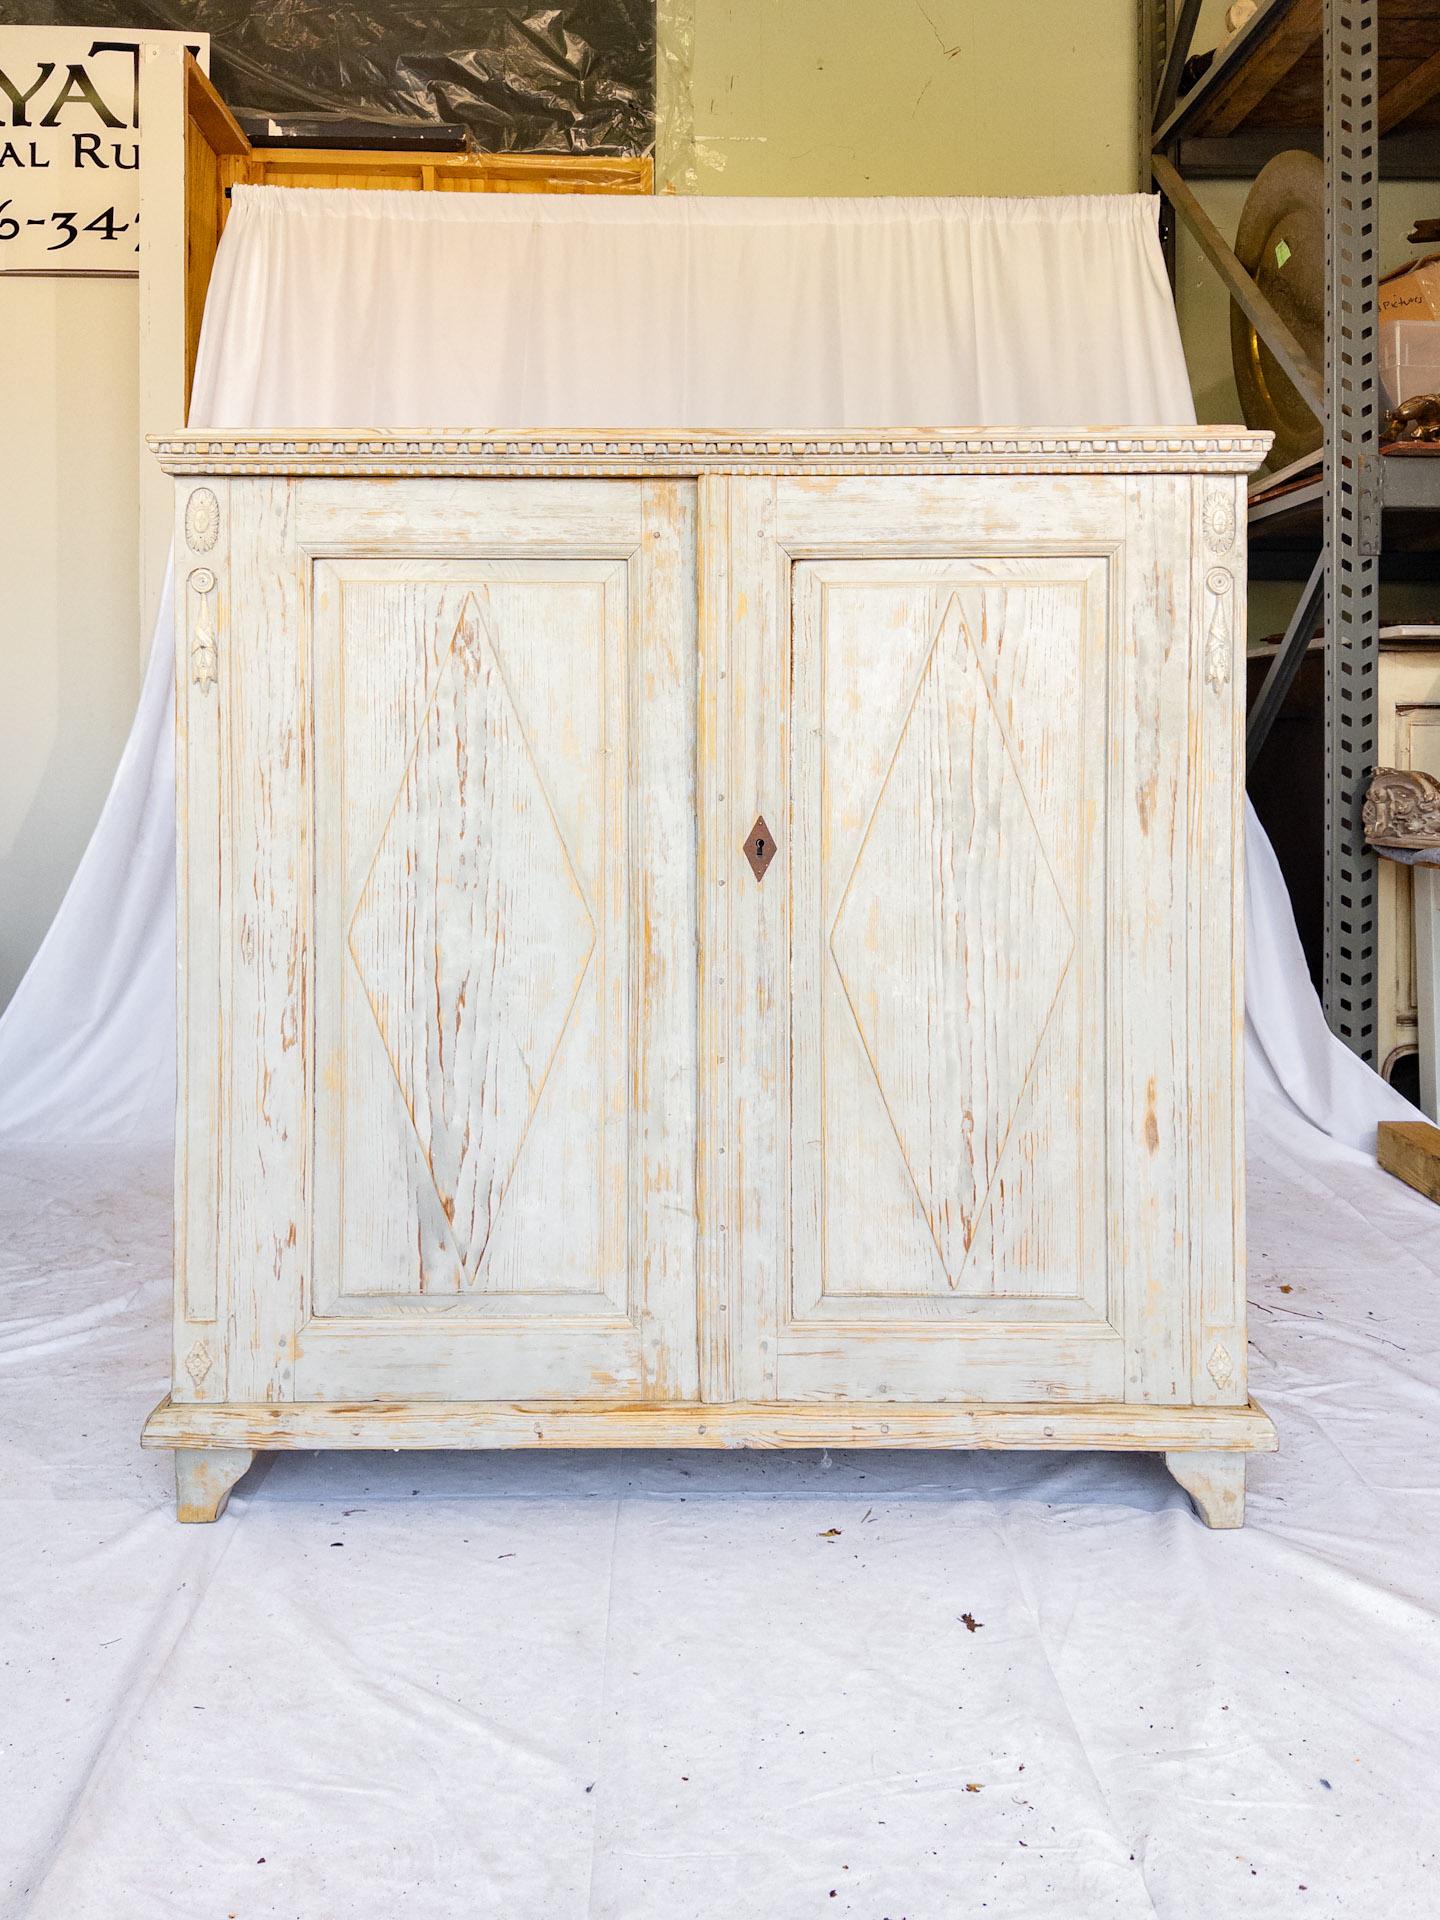 The Early 20th Century Swedish Cabinet epitomizes the grace and sophistication of Swedish craftsmanship during this period. Its distinguished features include intricate dental molding detail adorning the crown, adding a touch of refinement and